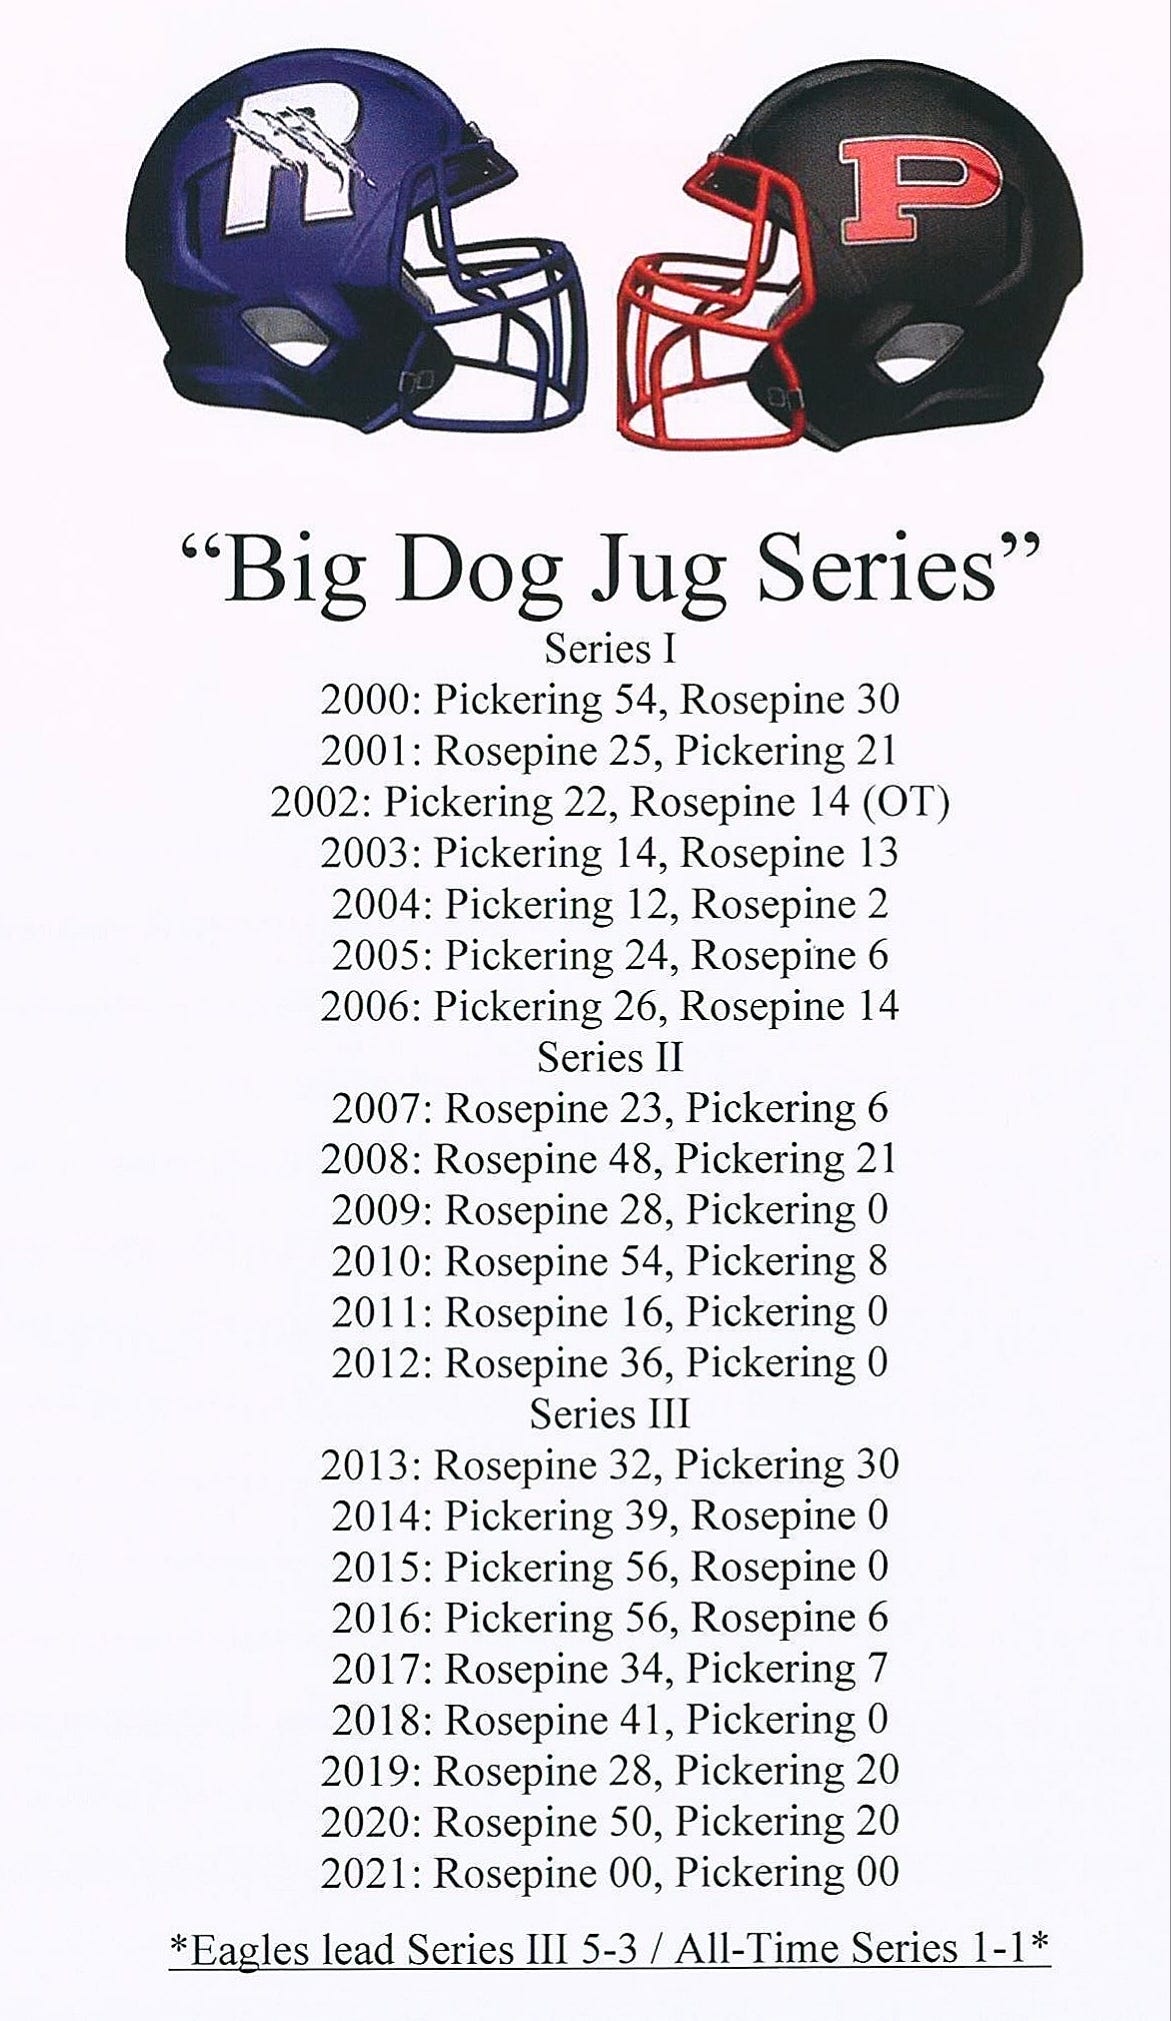 Historic results from the Big Dog Jug Series between Pickering and Rosepine.